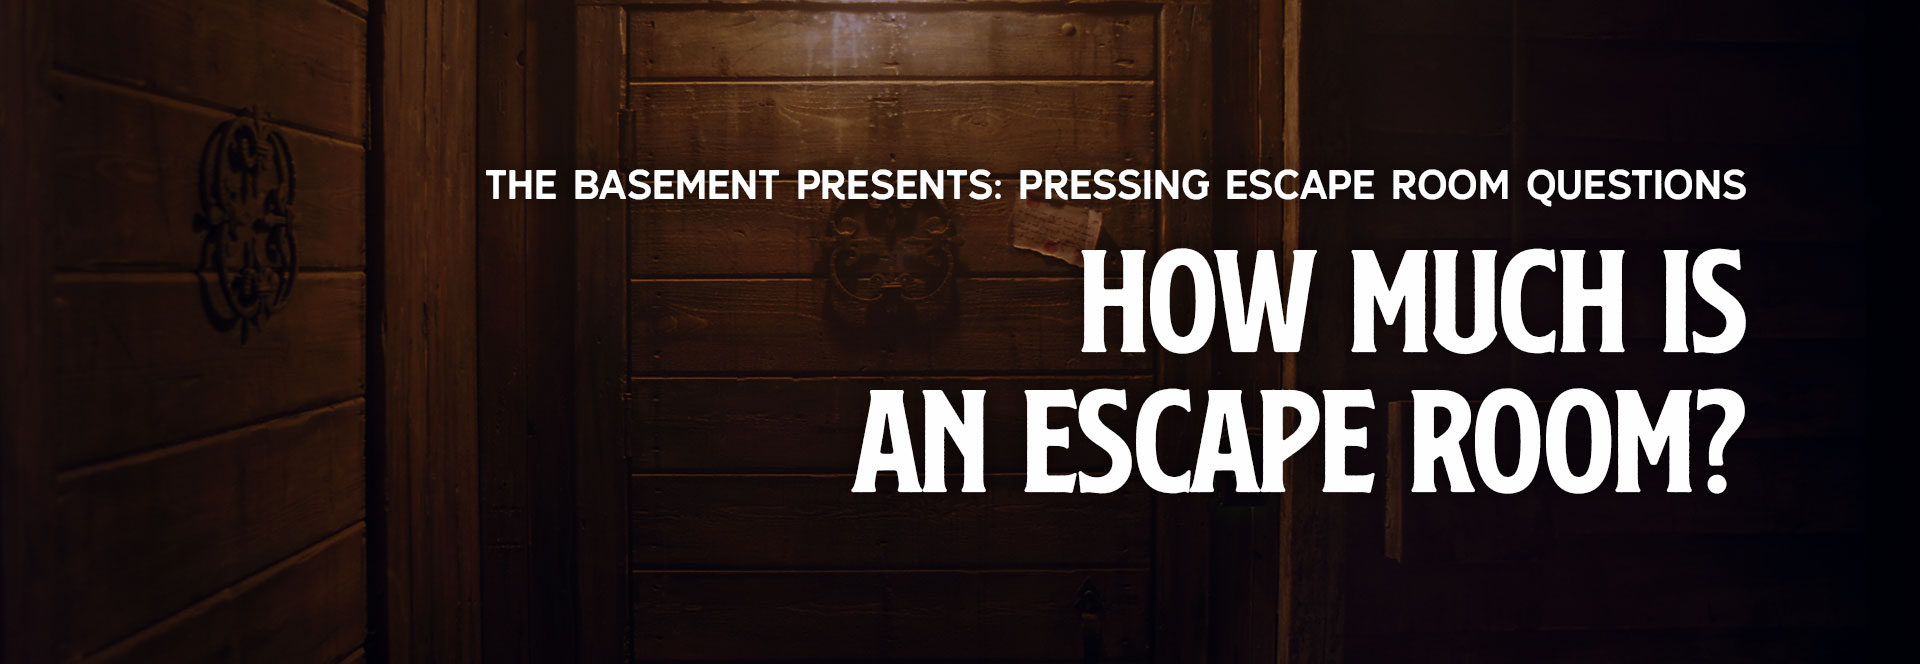 How Much Is An Escape Room?